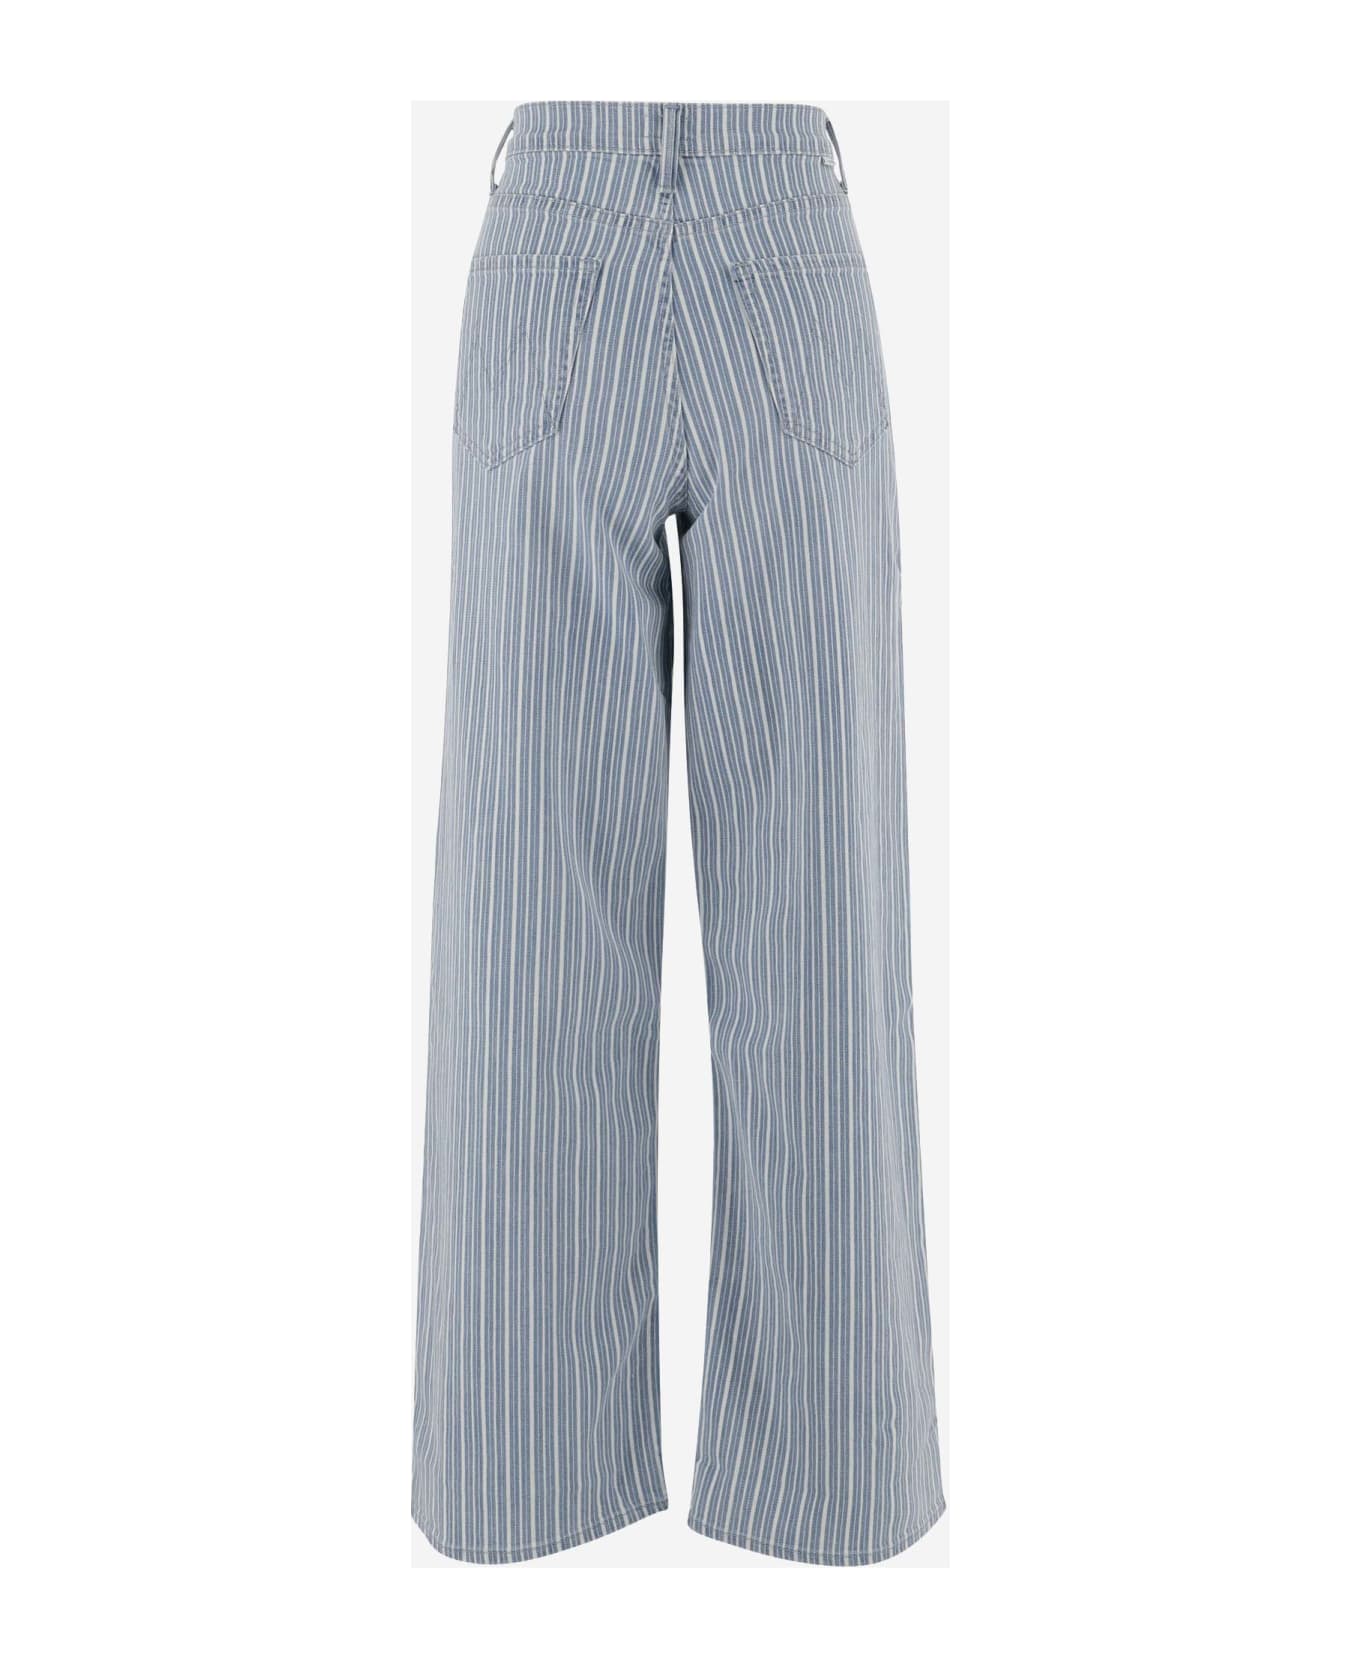 Mother Stretch Cotton Striped Flared Jeans - Denim ボトムス